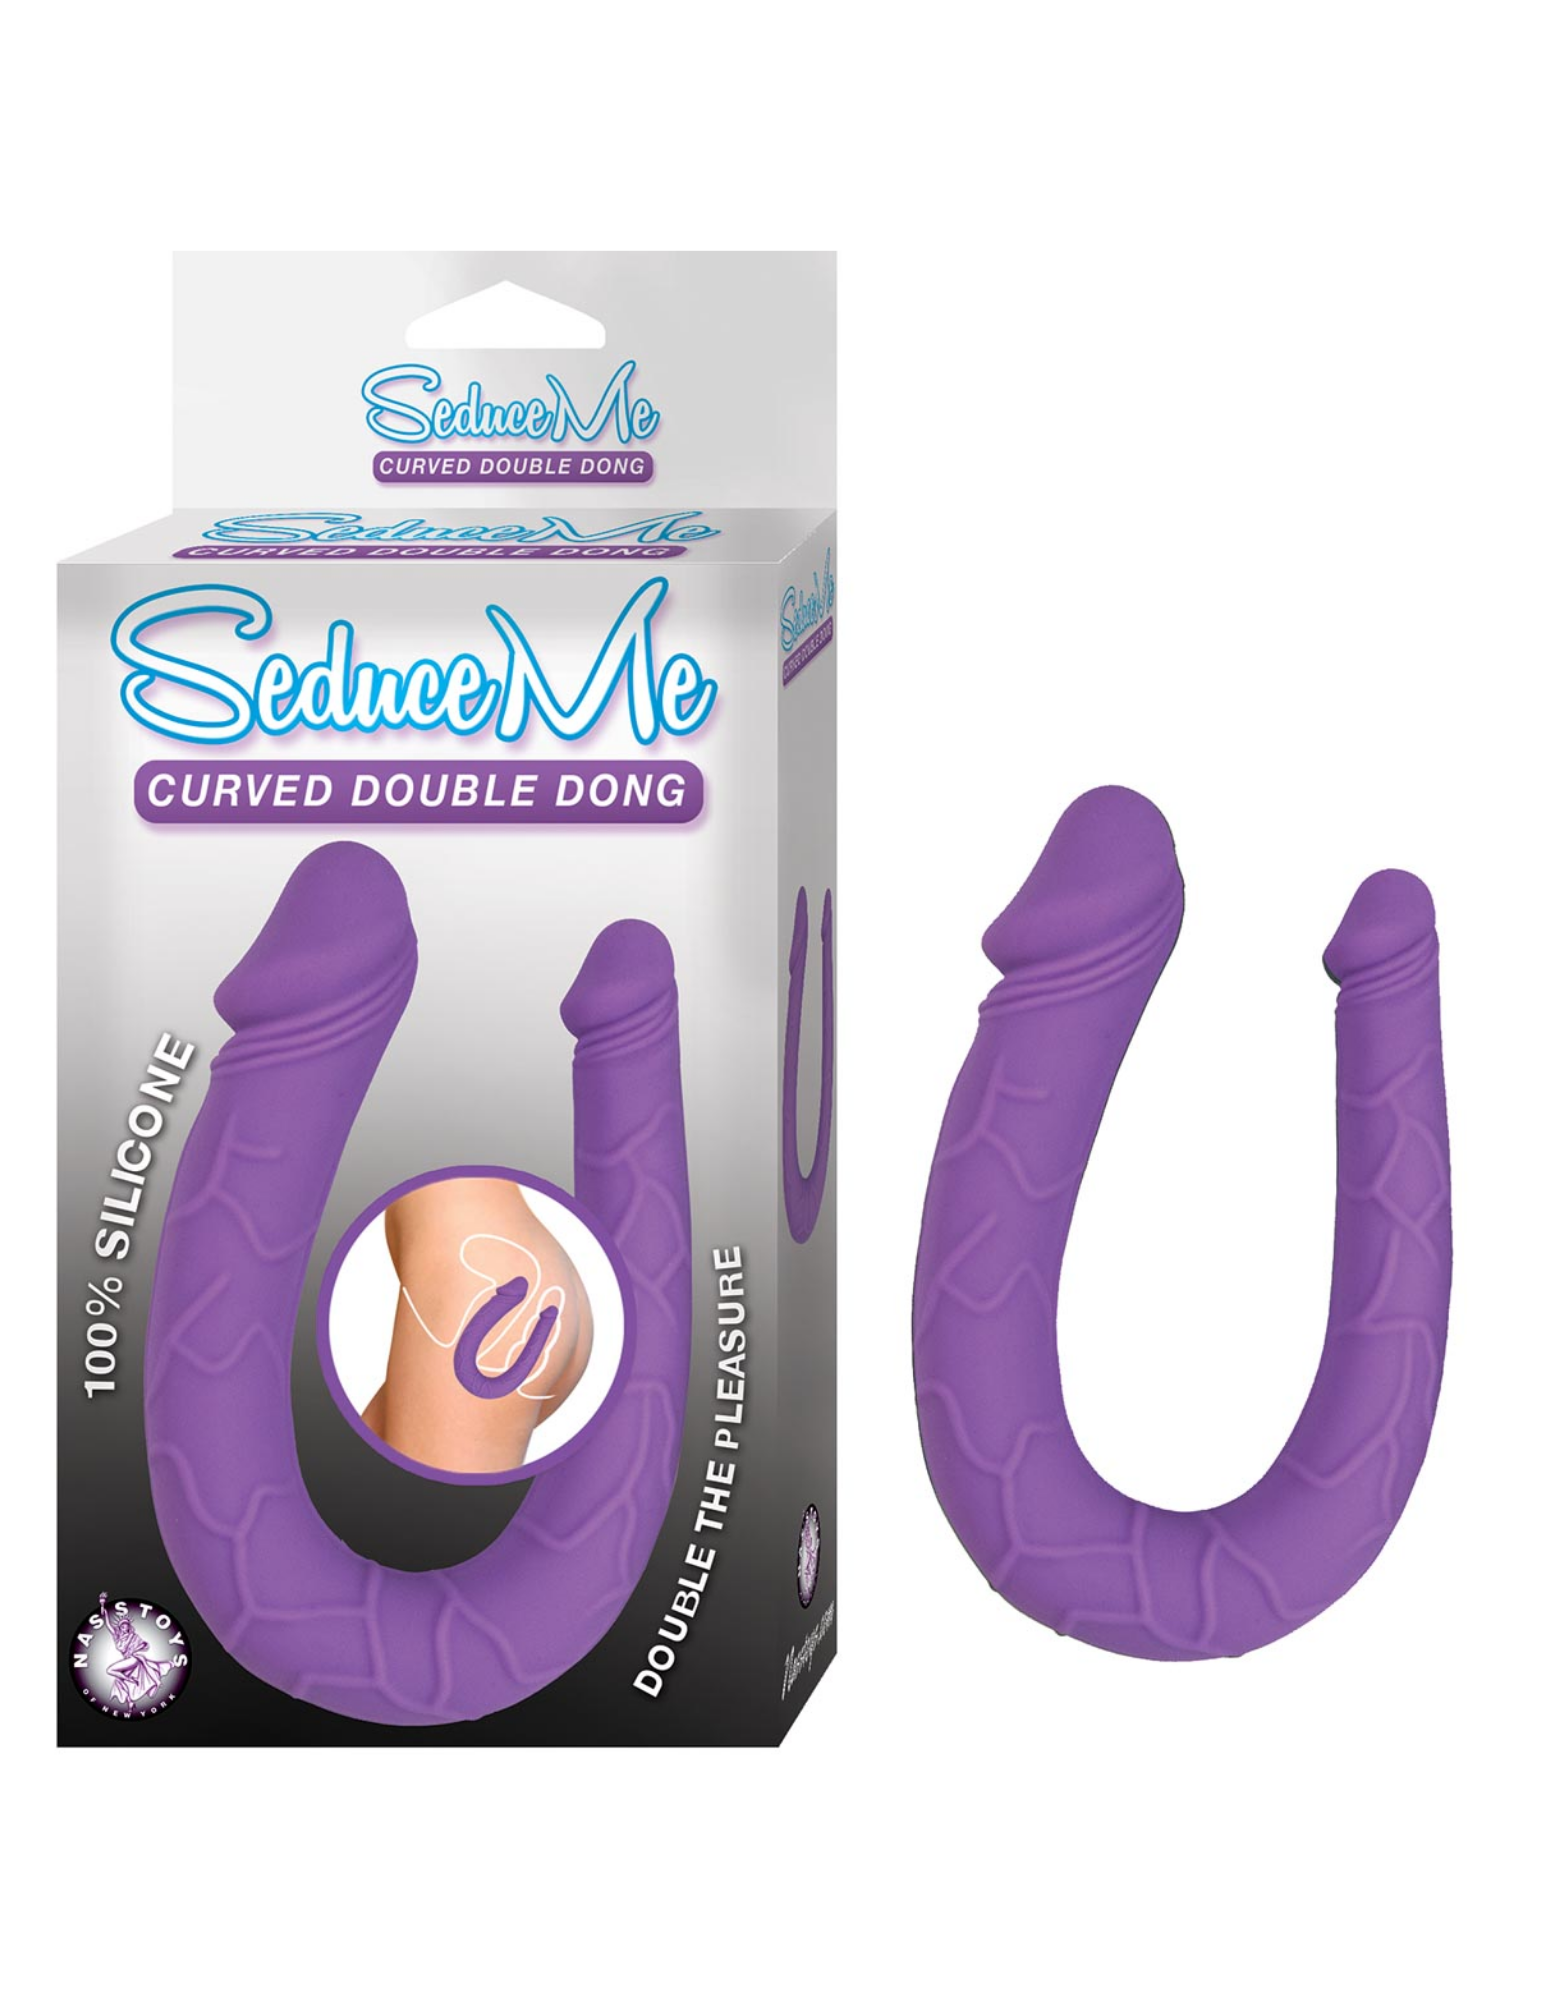 Nasstoys Seduce Me Curved Double Dong next to its package (purple).